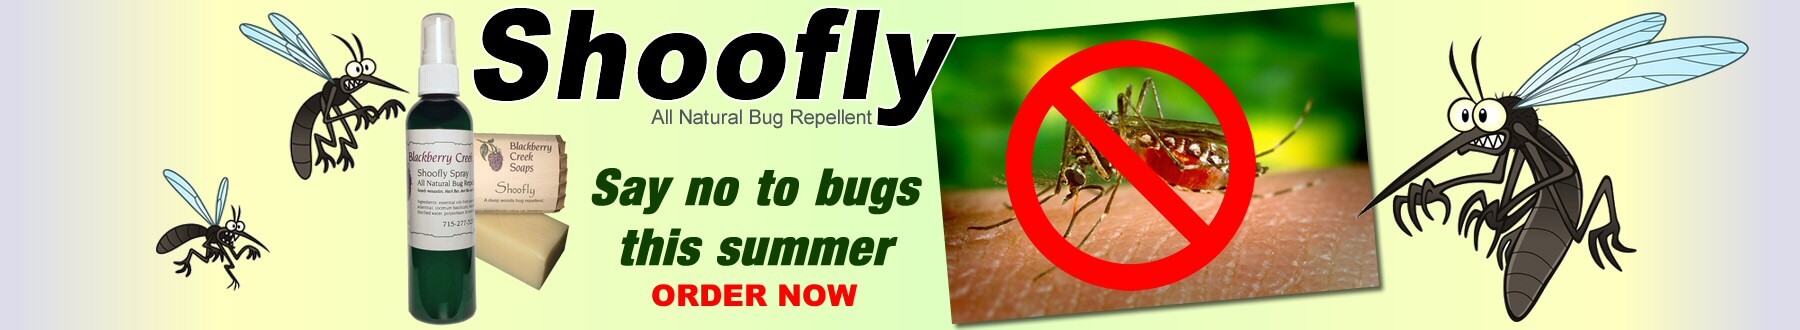 Shoofly All Natural Bug Repellant | Say No To Bugs This Summer ORDER NOW